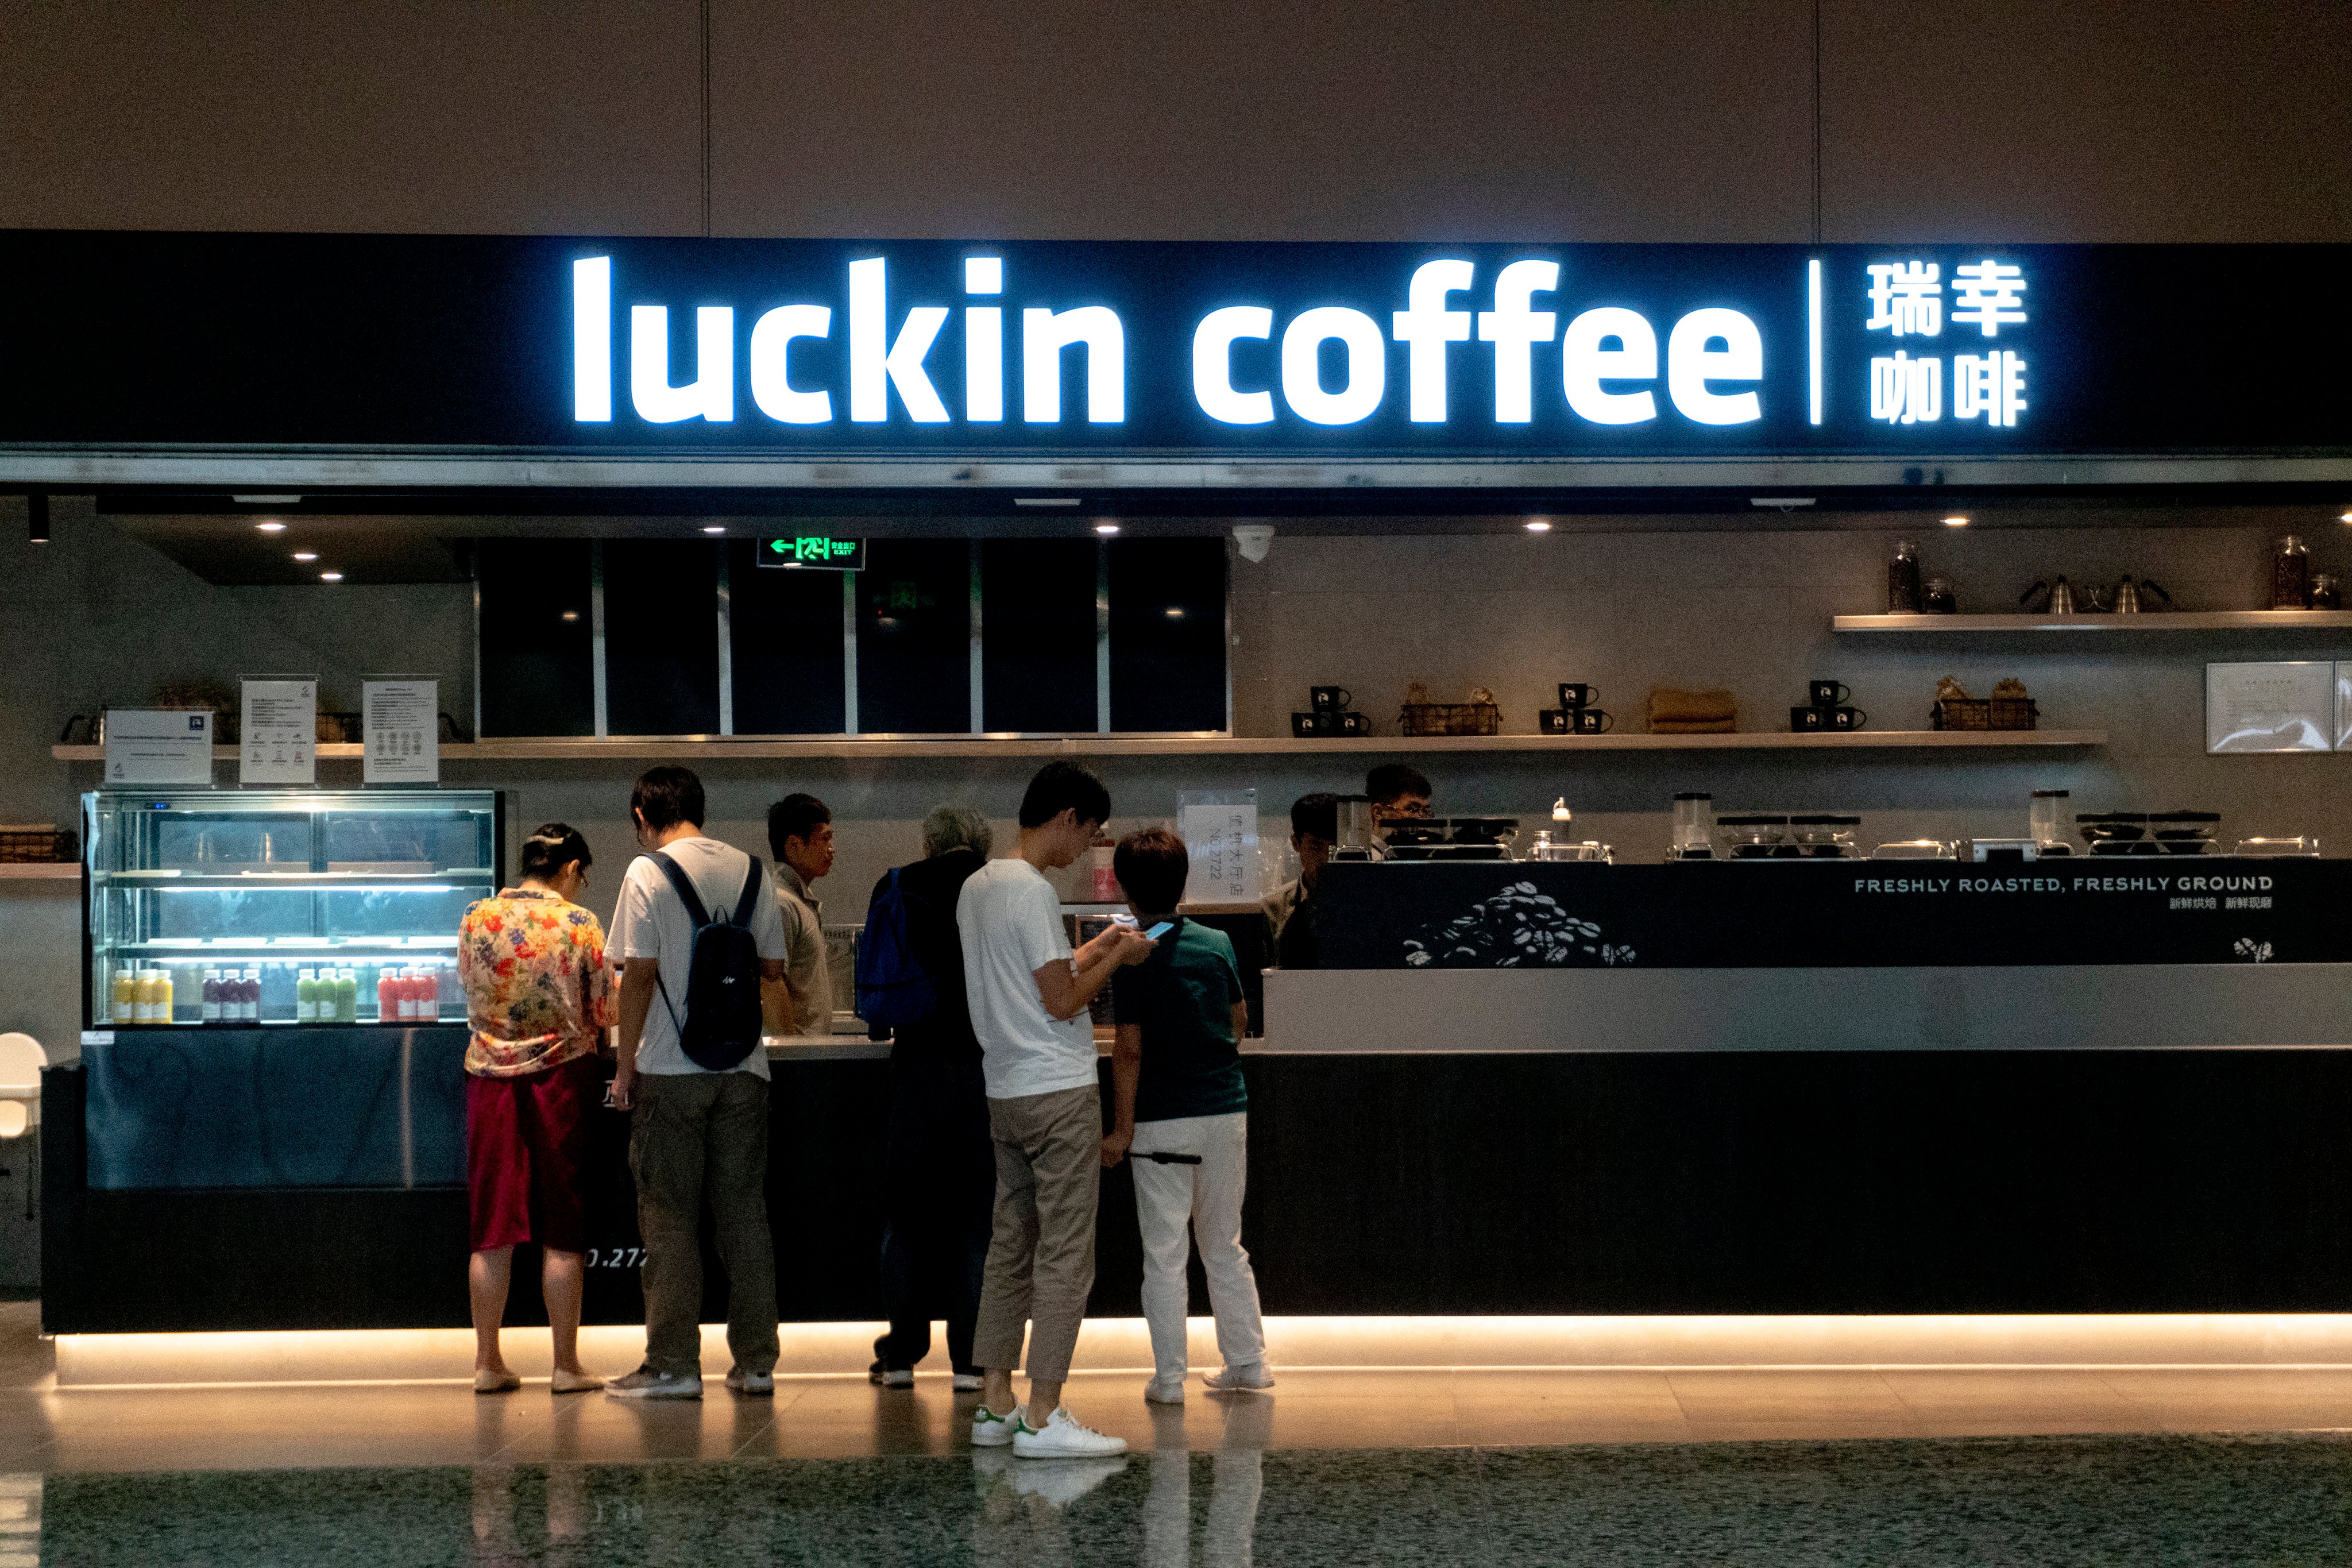 Patrons wait in line at a Luckin Coffee store in Beijing Daxing International Airport in 2019. Photo: Getty Images